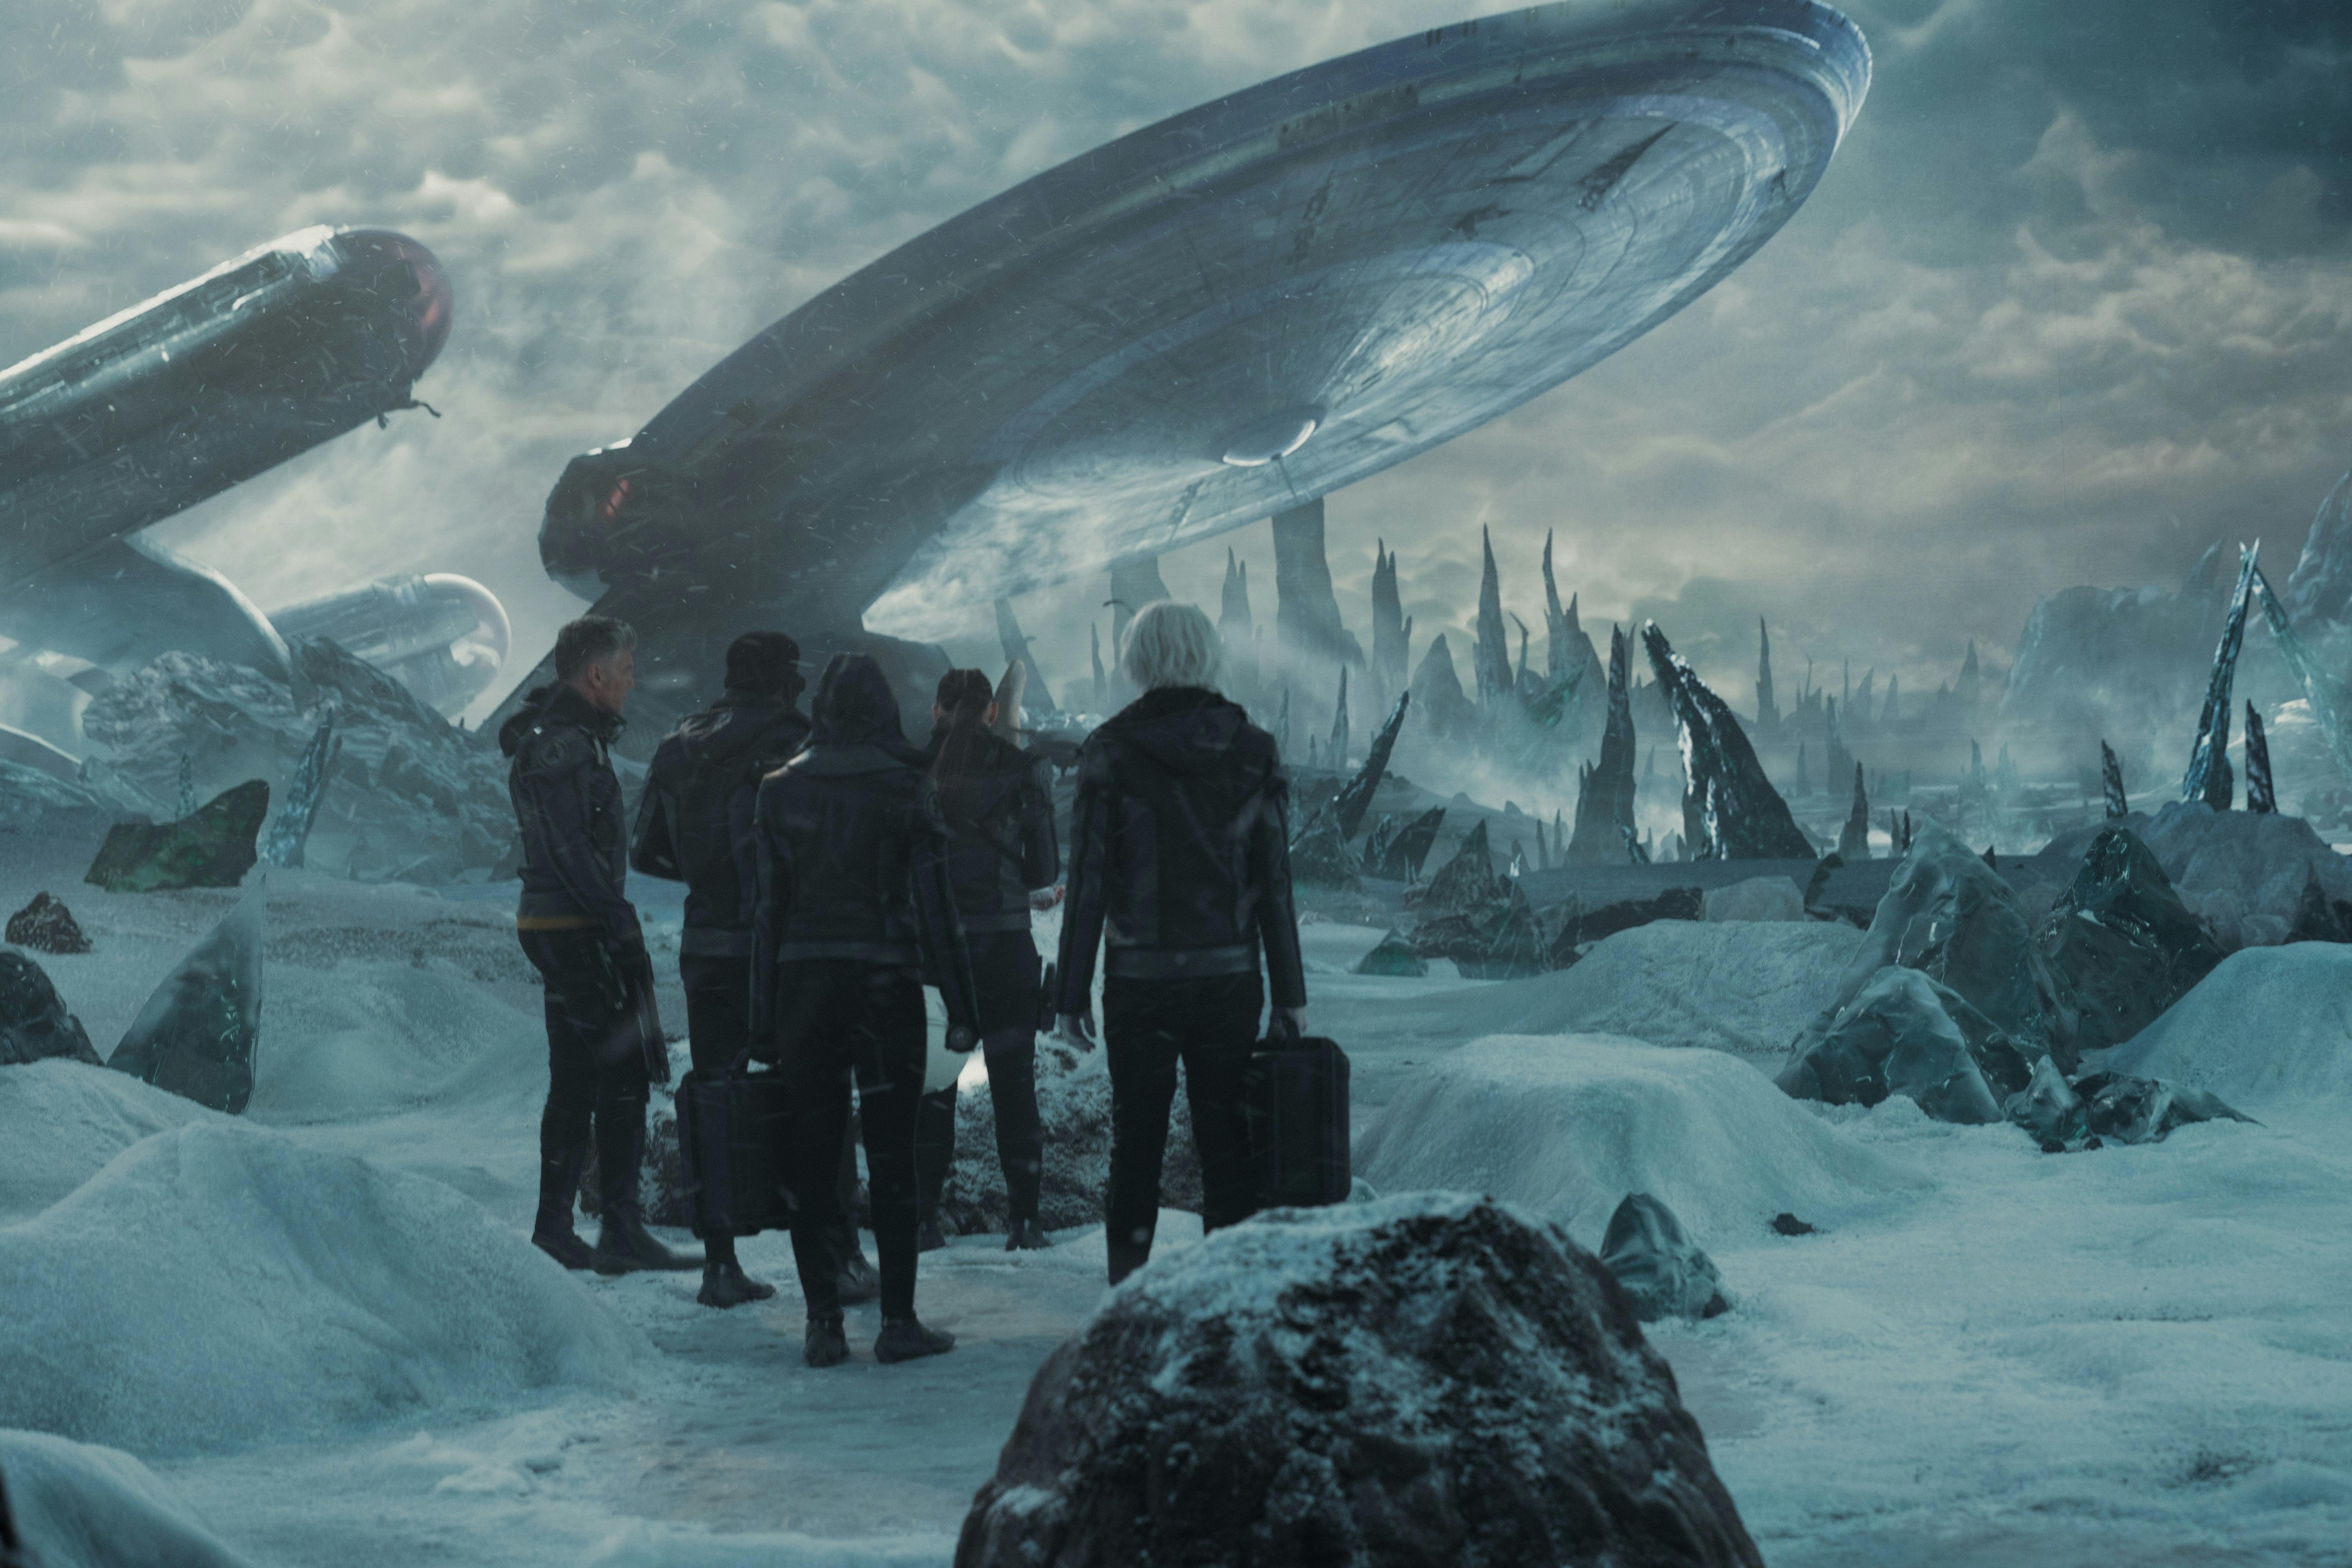 A large group looks at a crashed starship on a snowy planet.